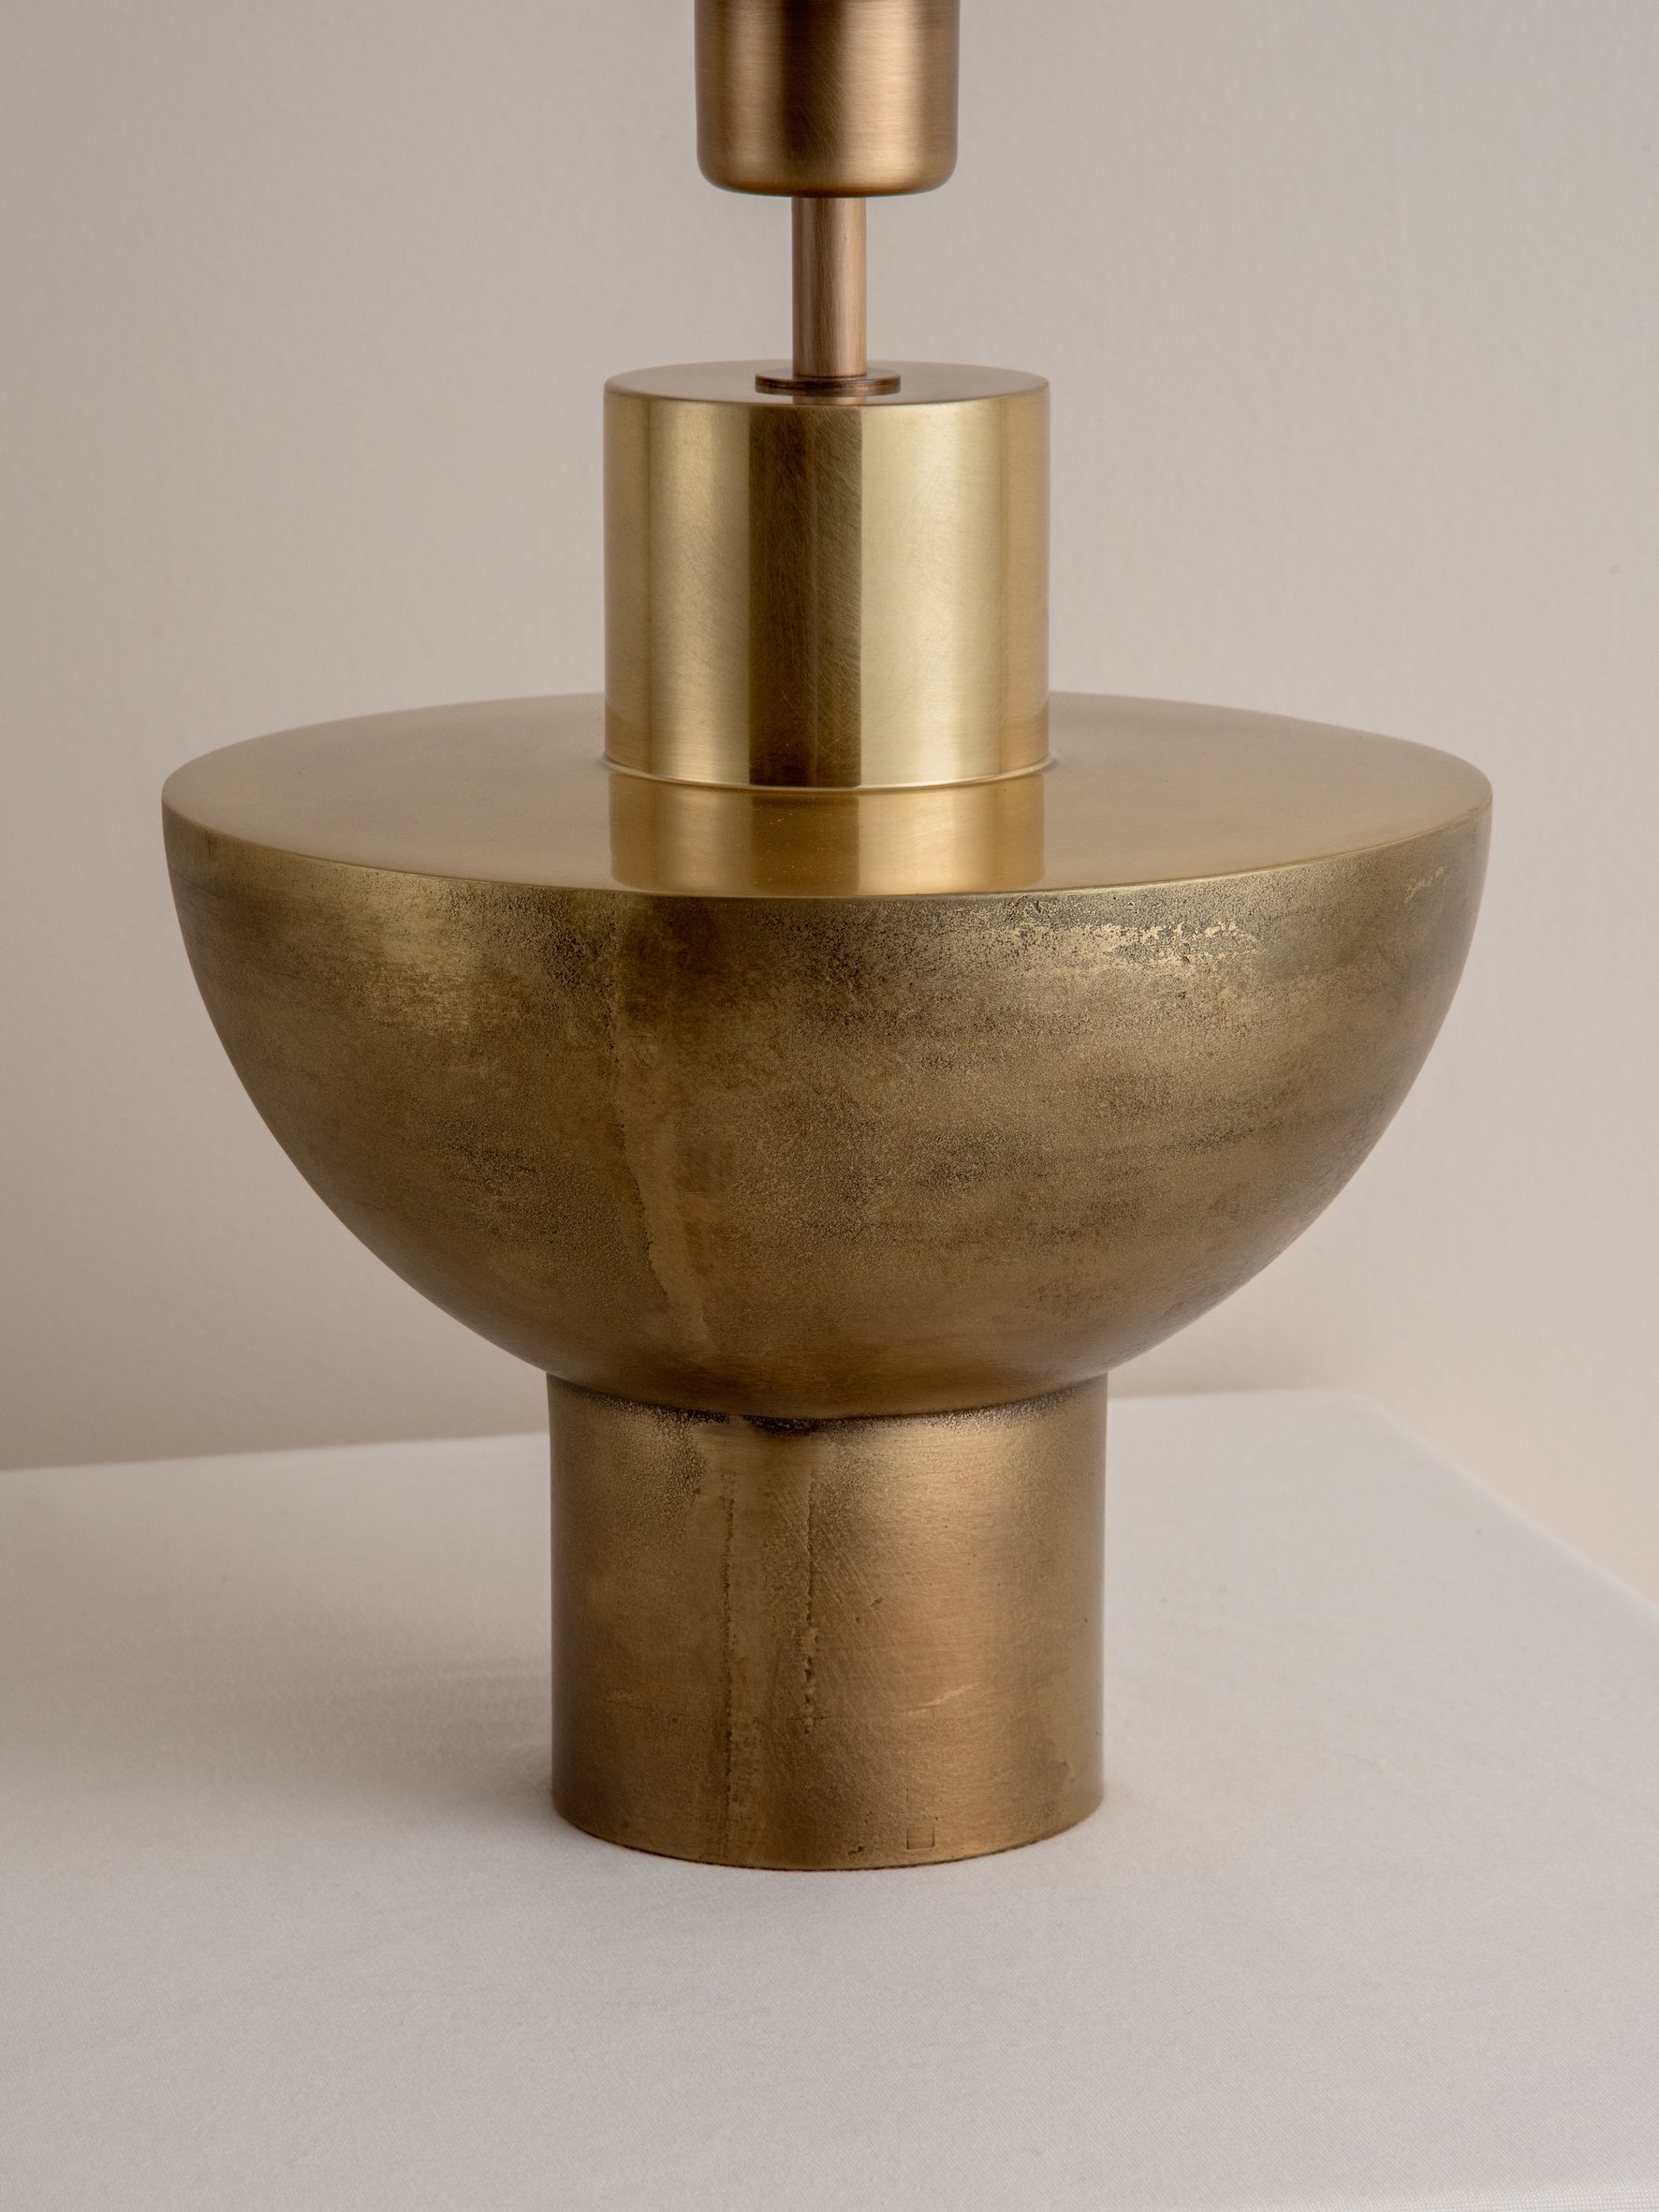 Editions brass lamp with + bronze shade | Table Lamp | Lights & Lamps Inc | Modern Affordable Designer Lighting | USA